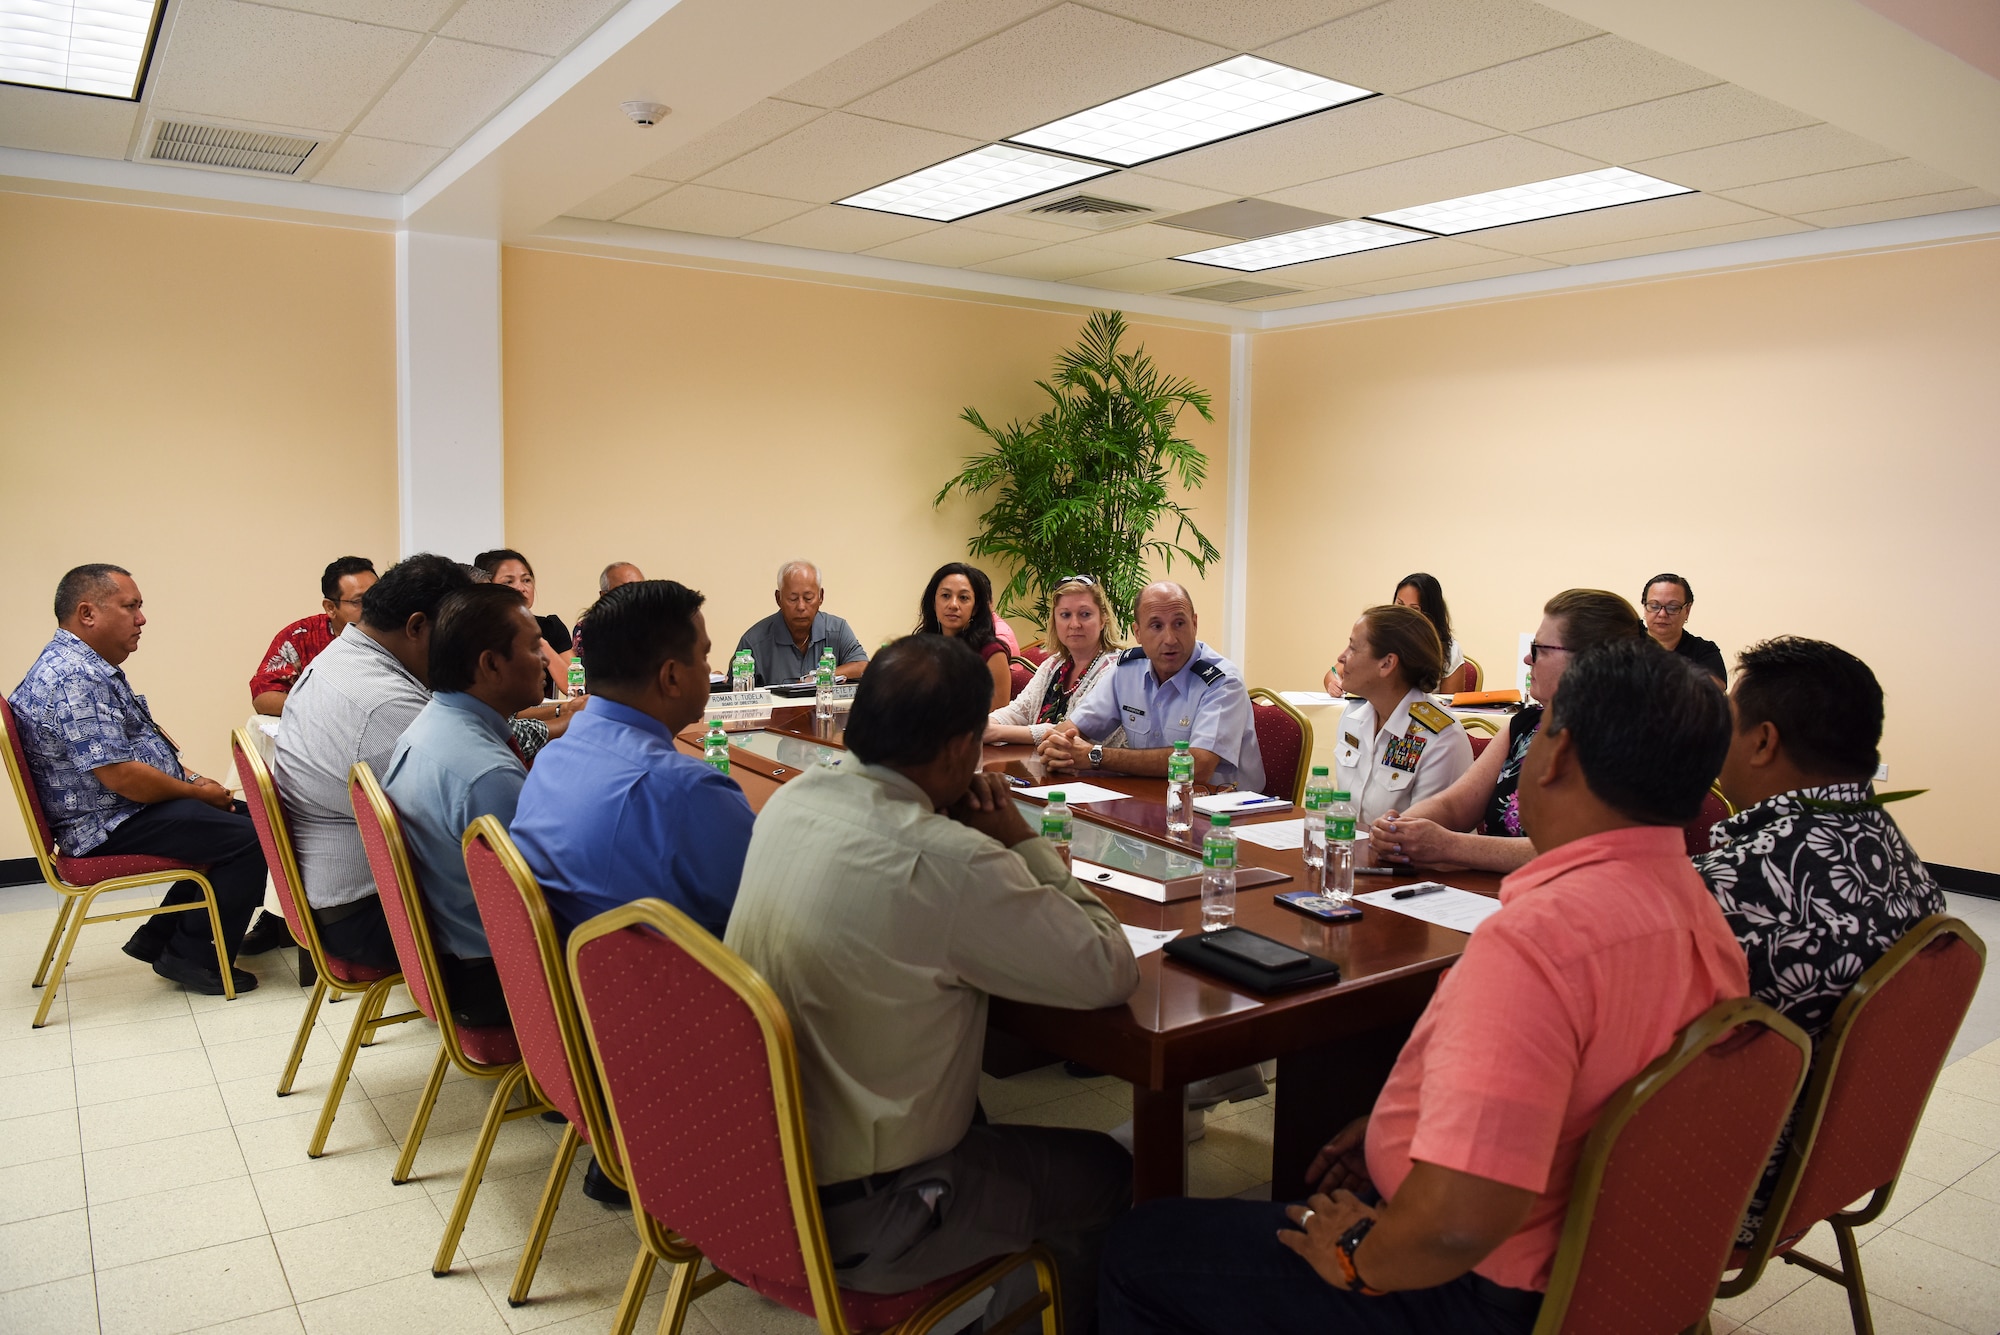 Officials from the Department of Defense, Commonwealth Port Authority, and the government of the Commonwealth of the Northern Mariana Islands hold a meeting before signing the Tinian divert airfield lease agreement May 3, 2019, at Tinian Airport, CNMI. The $21.9 million lease deal is intended to allow the U.S. Air Force to divert aircraft to Tinian for training and operations, while also spurring economic growth on the island of Tinian. (U.S. Air Force photo by Tech. Sgt. Jake Barreiro)